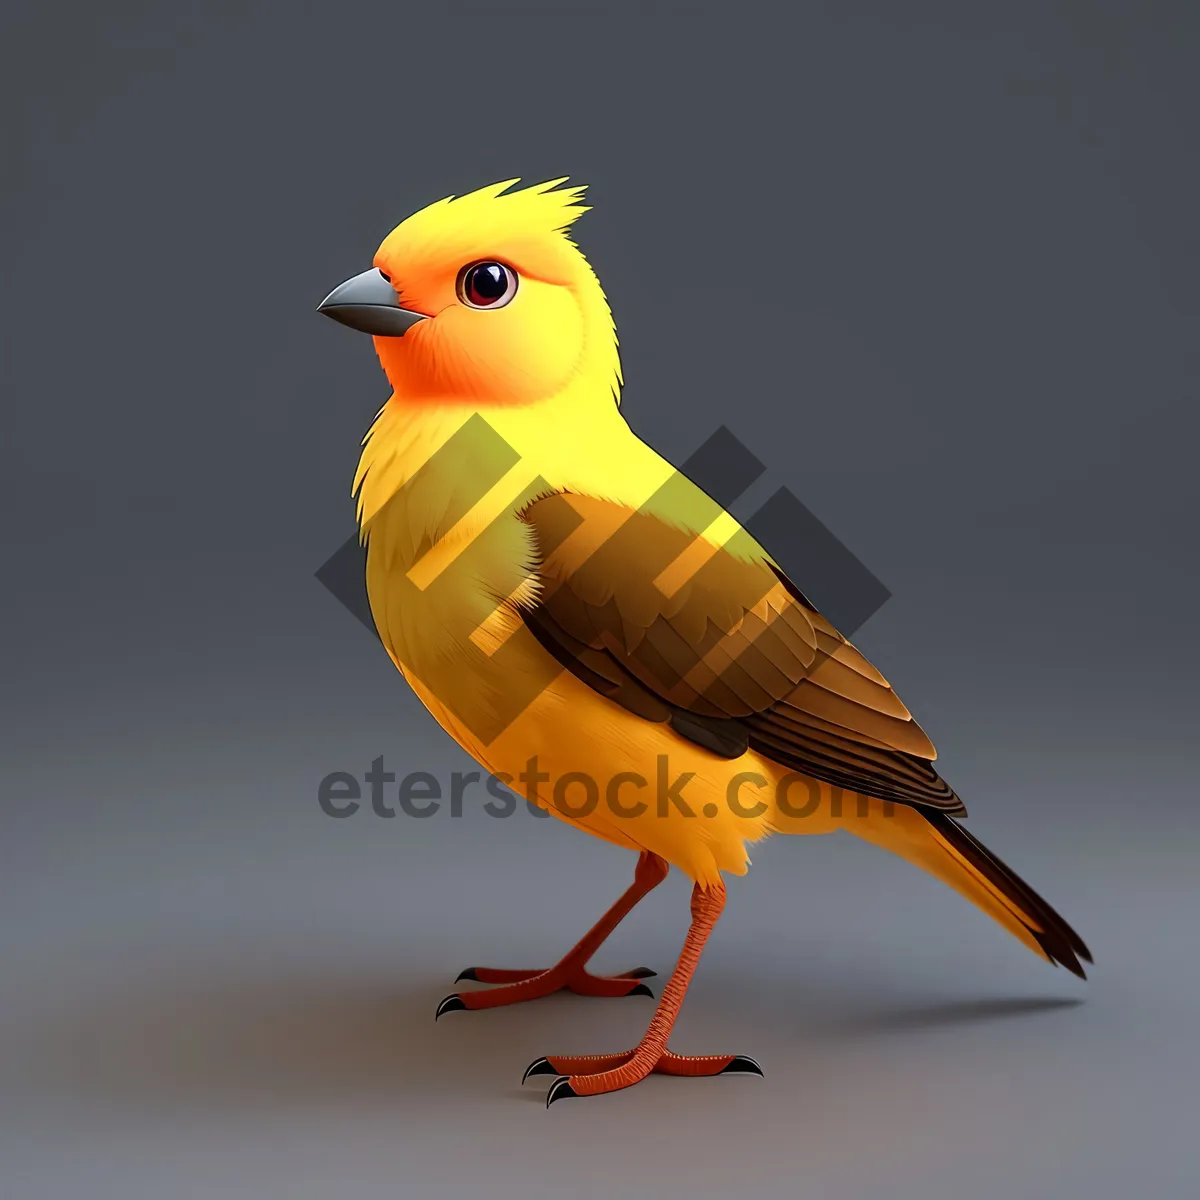 Picture of Vibrant Yellow Bird perched in Habitat